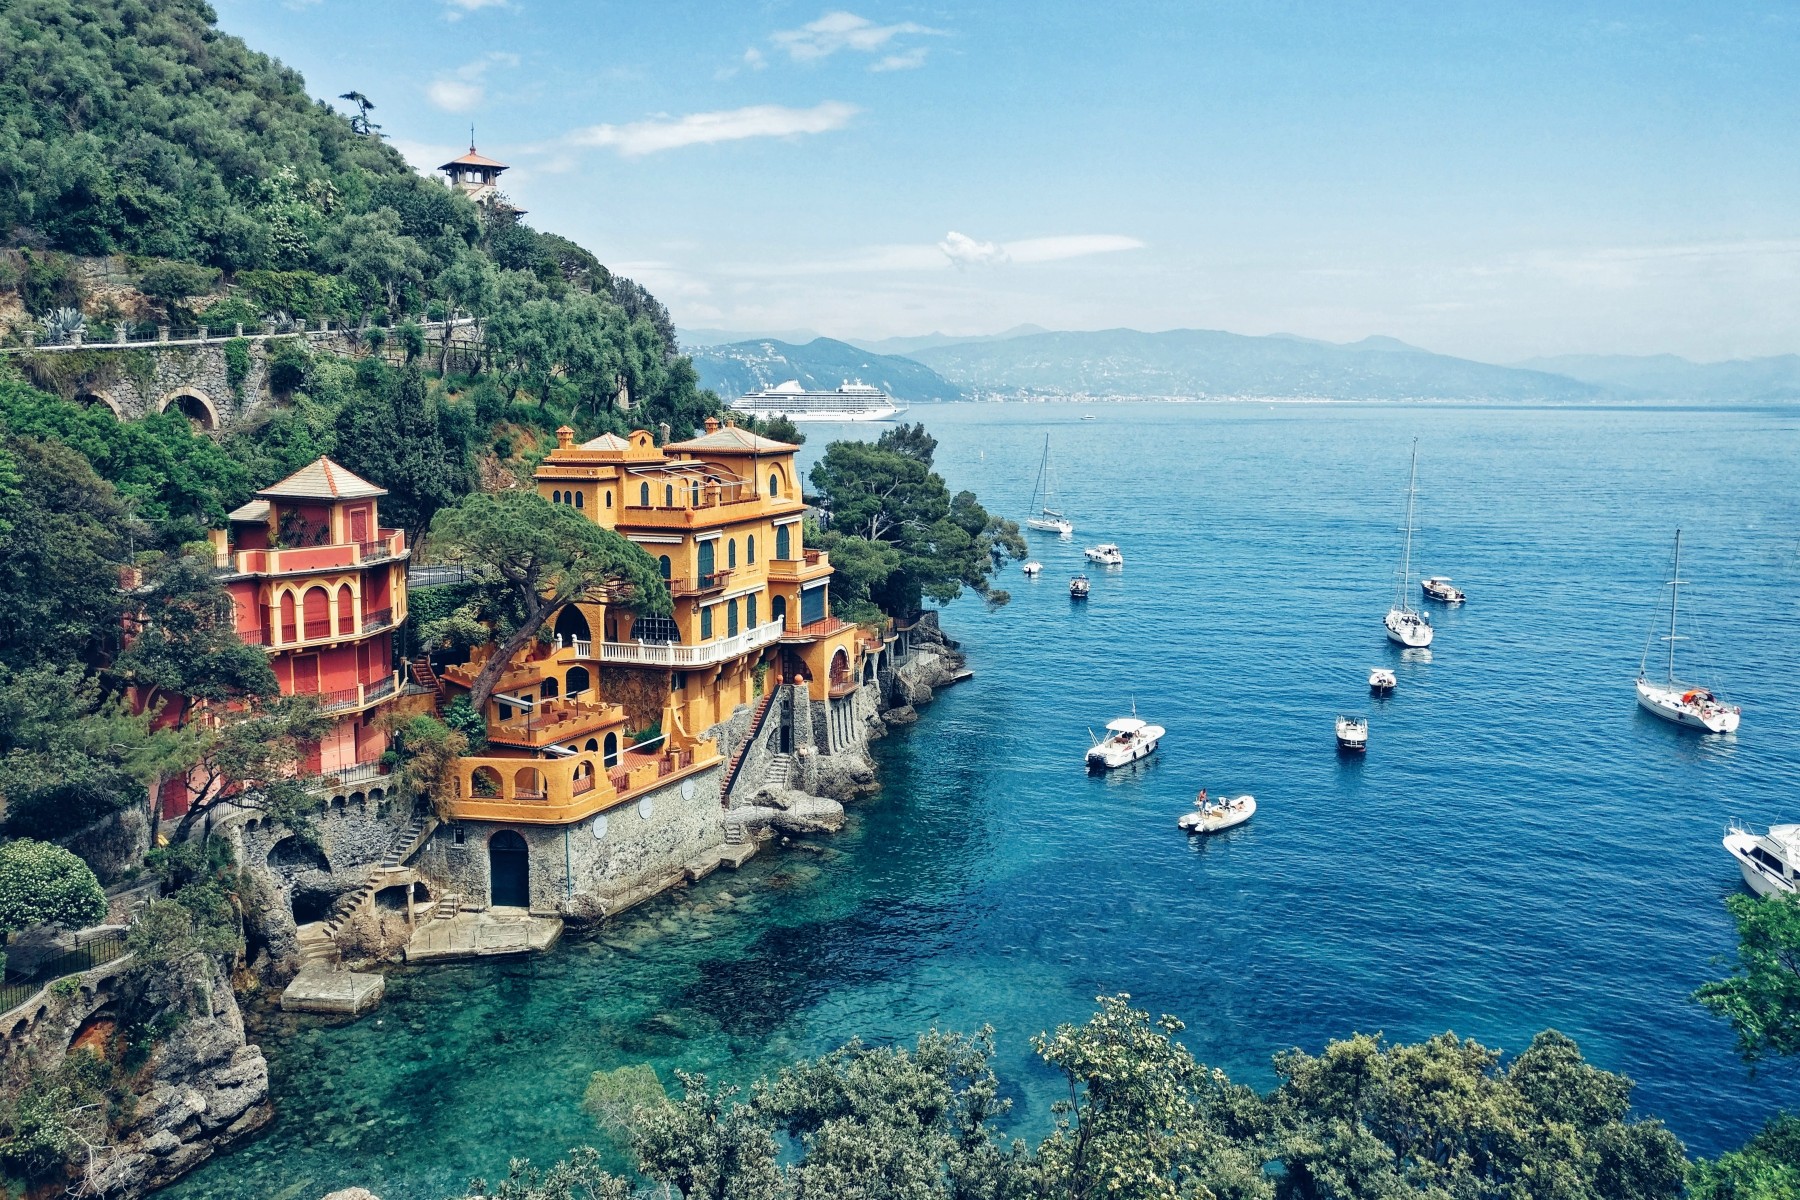 View of houses on a hill top near the water front, surrounded by trees in Portofino, Italy.